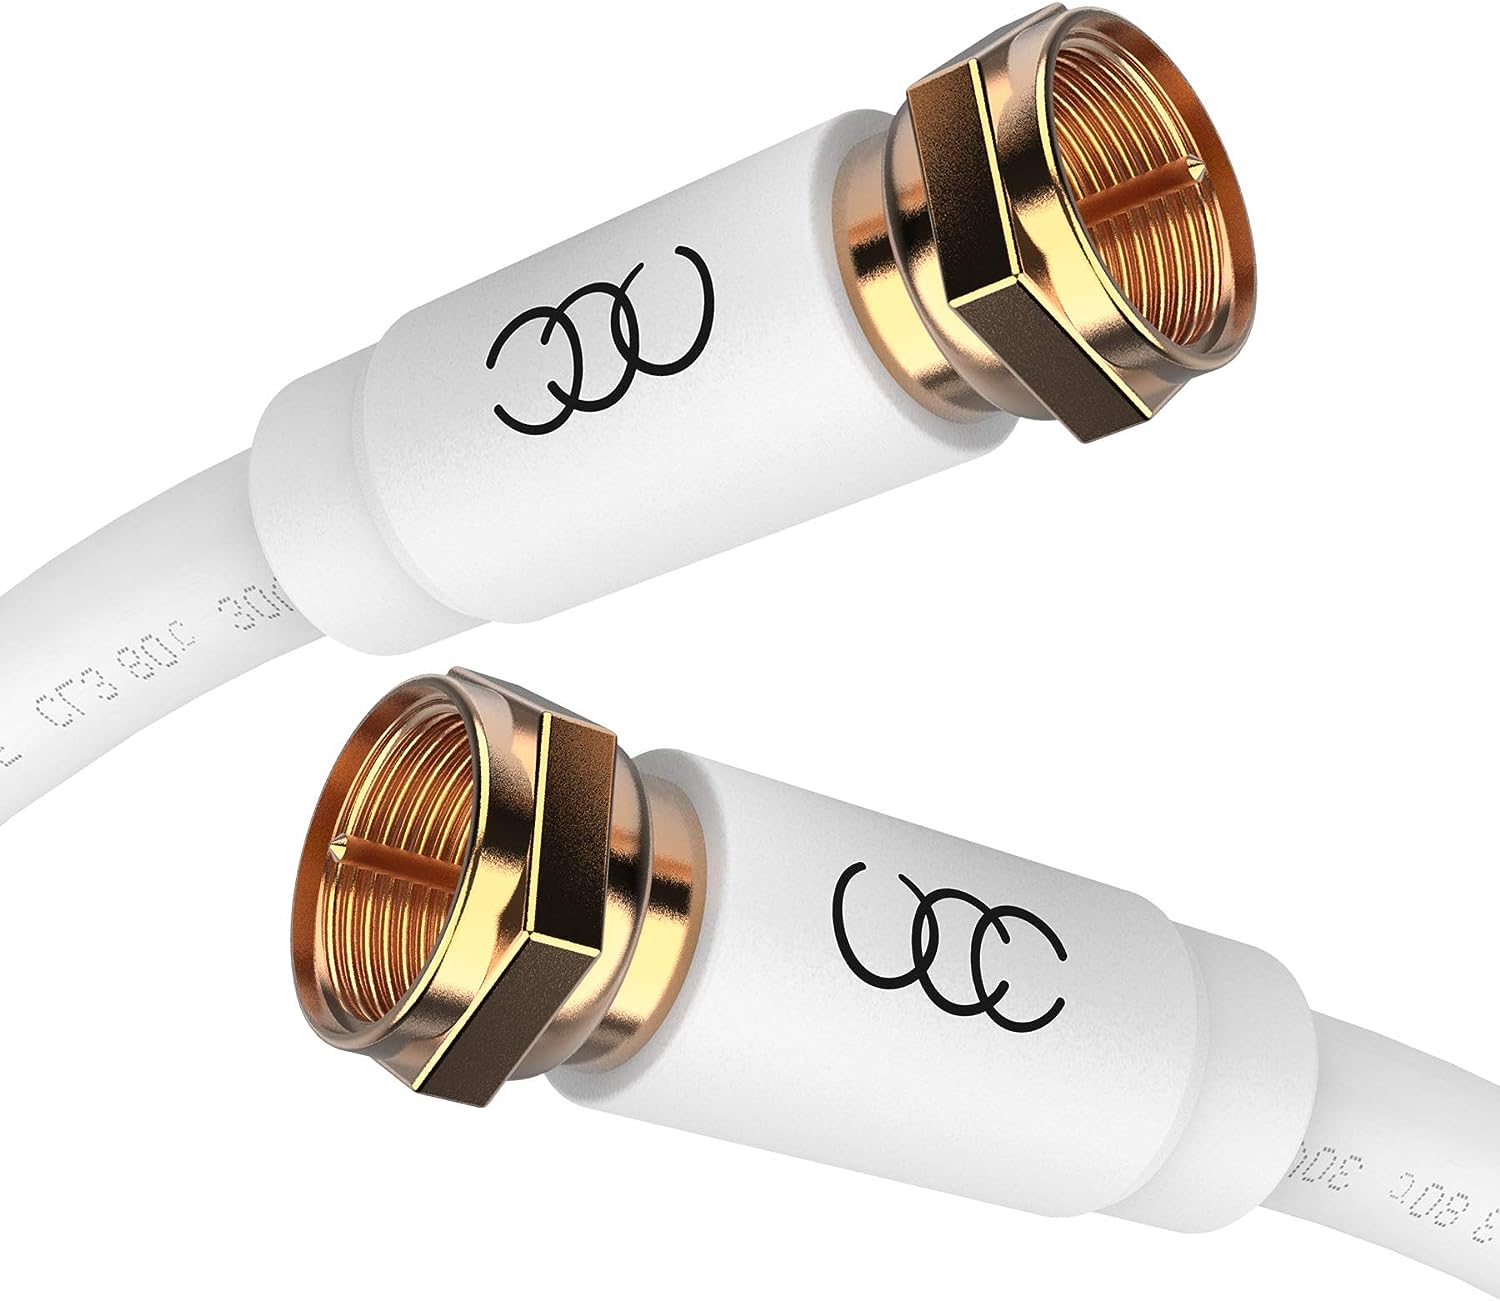 UCC Coaxial Cable (25 ft) Triple Shielded - RG6 Coax [...]